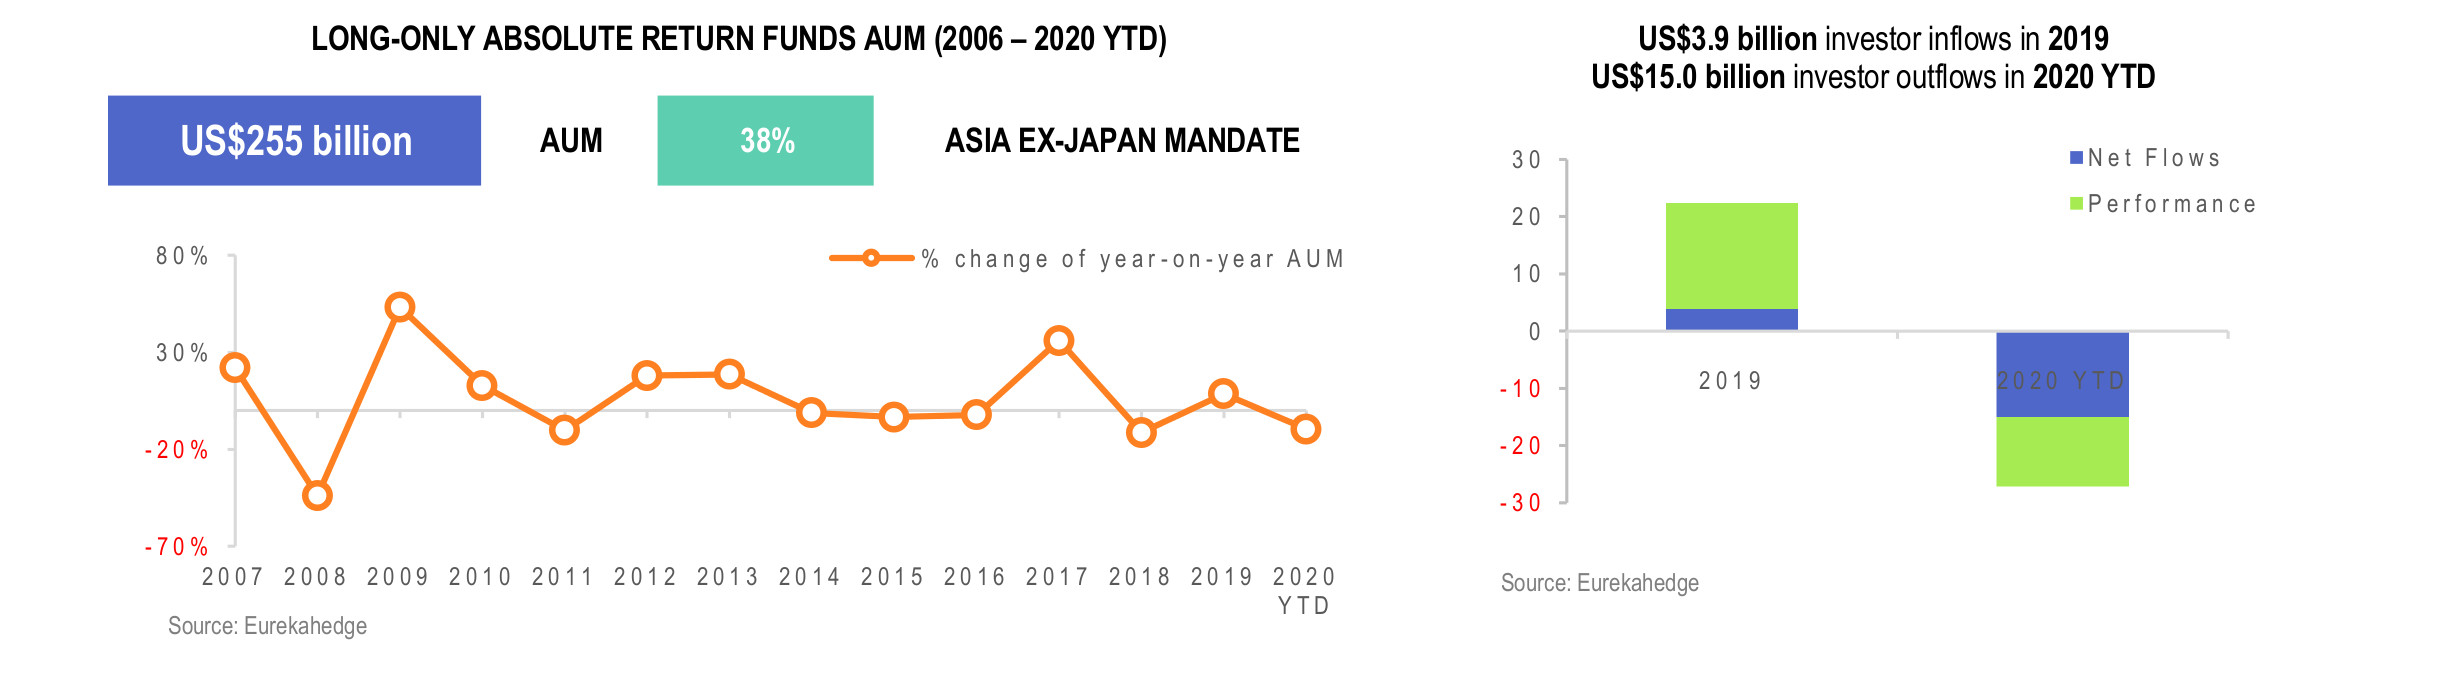 Long-only Absolute Return Funds Infographic July 2020 - AUM